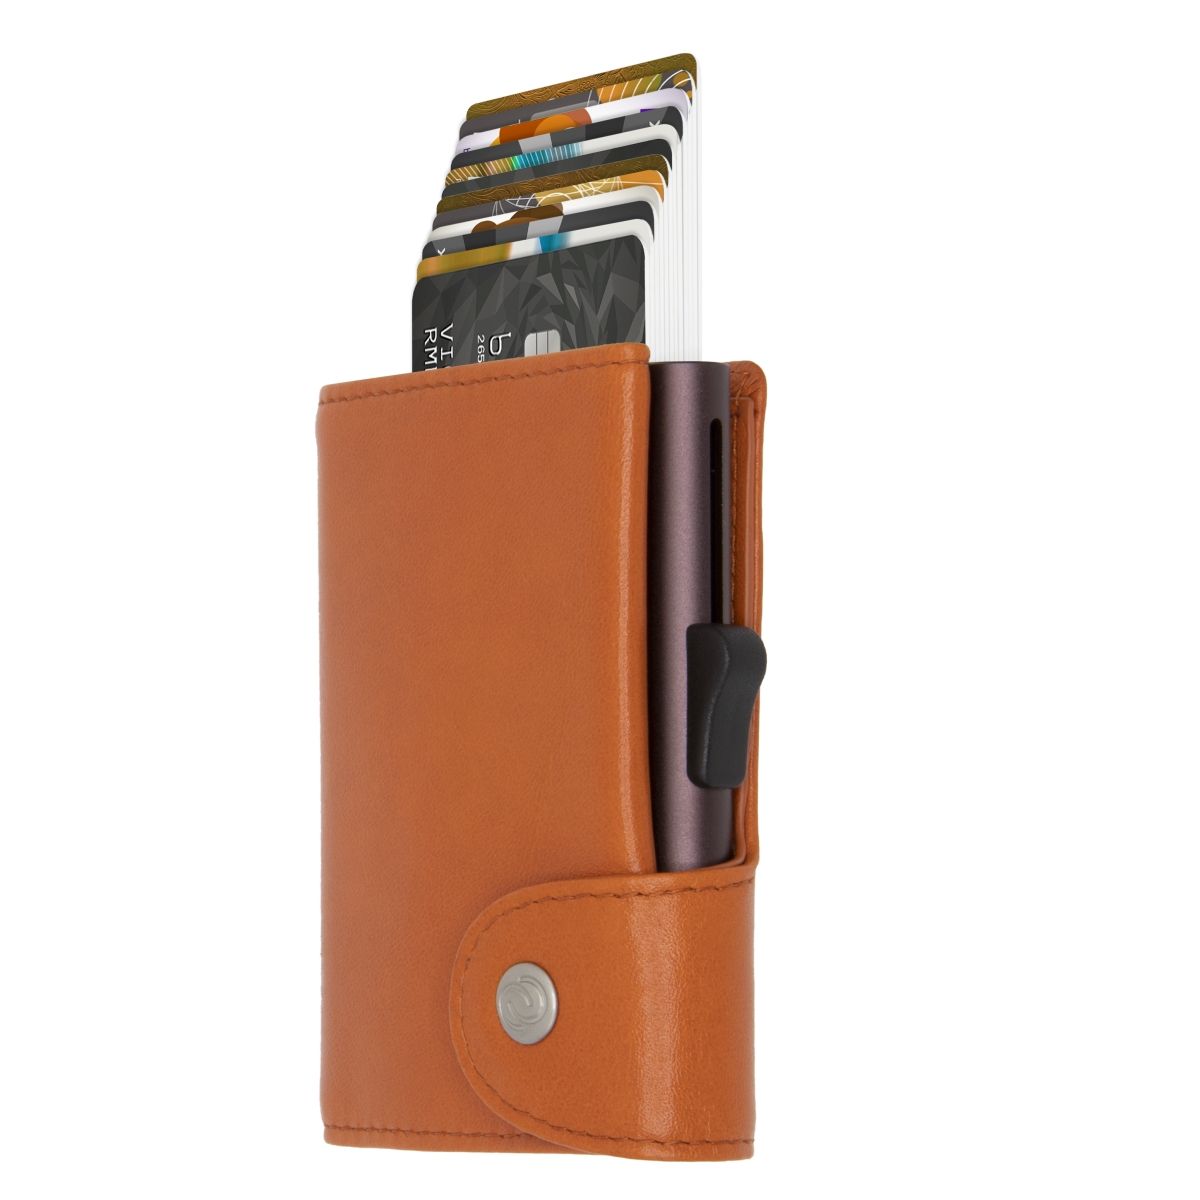 C-Secure XL Aluminum Wallet with Genuine Leather - Mogano Brown